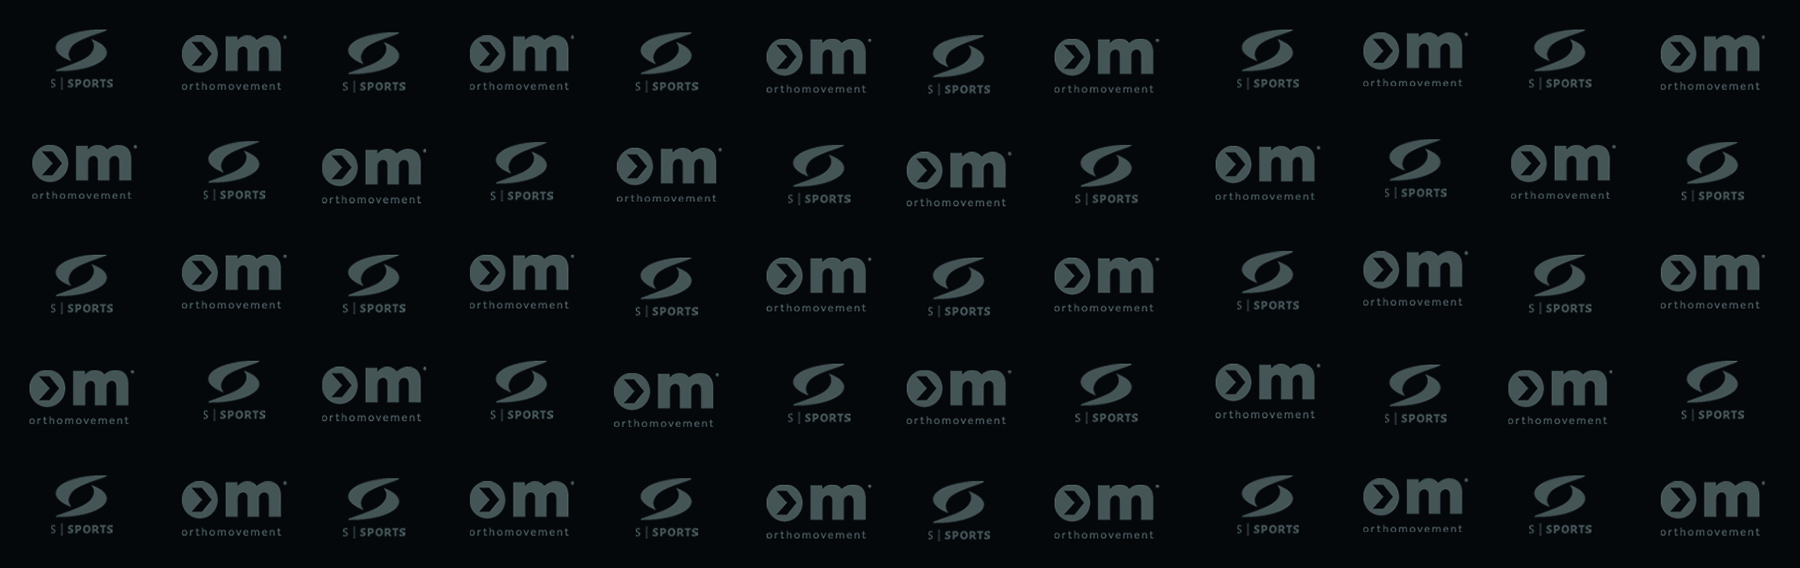 Ortho Movement Partners with Supersports to Take Footwear and Insole Technology to a New Level